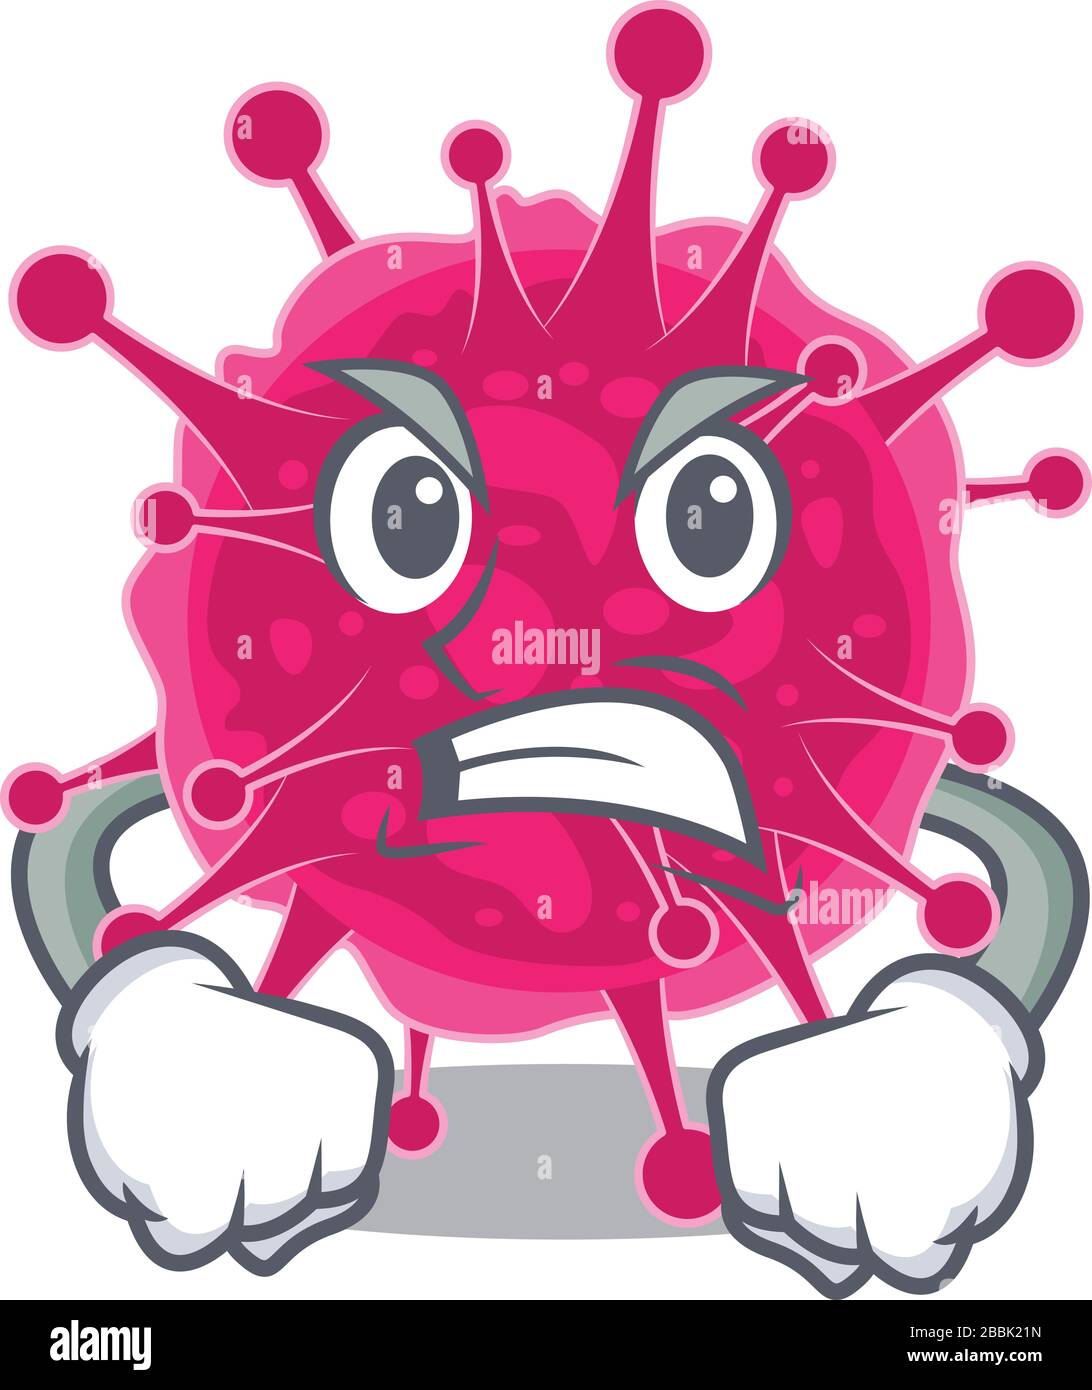 Mascot design concept of picornaviridae with angry face Stock Vector